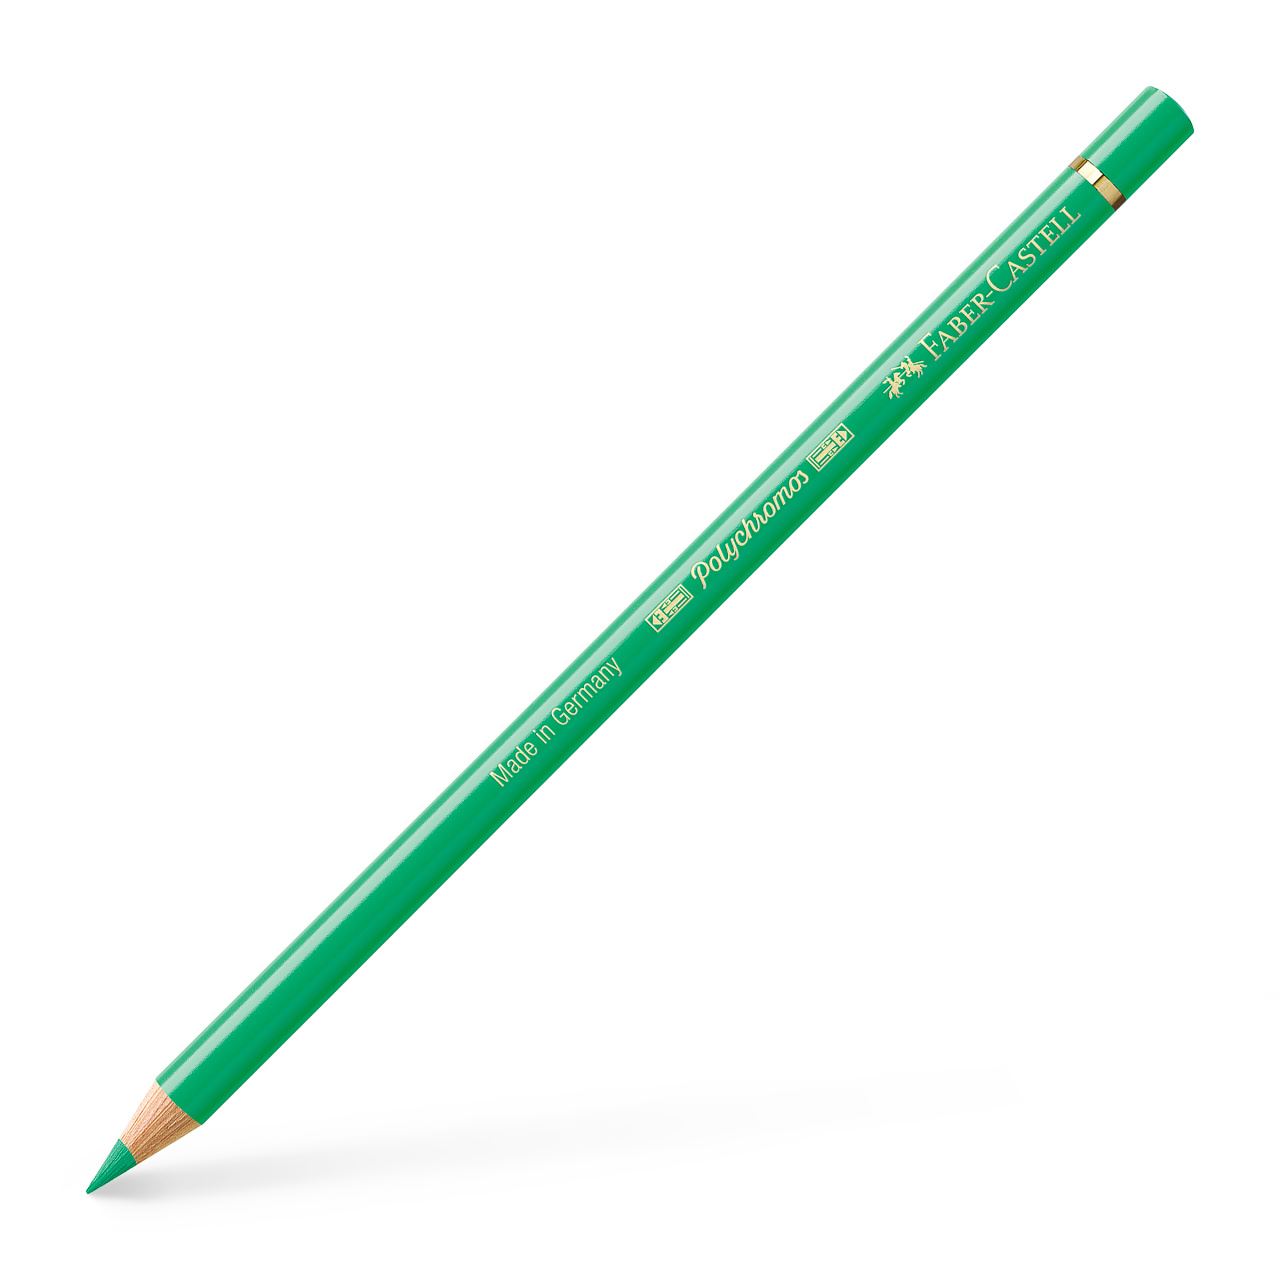 Faber-Castell - Polychromos colour pencil, 162 light phthalo green